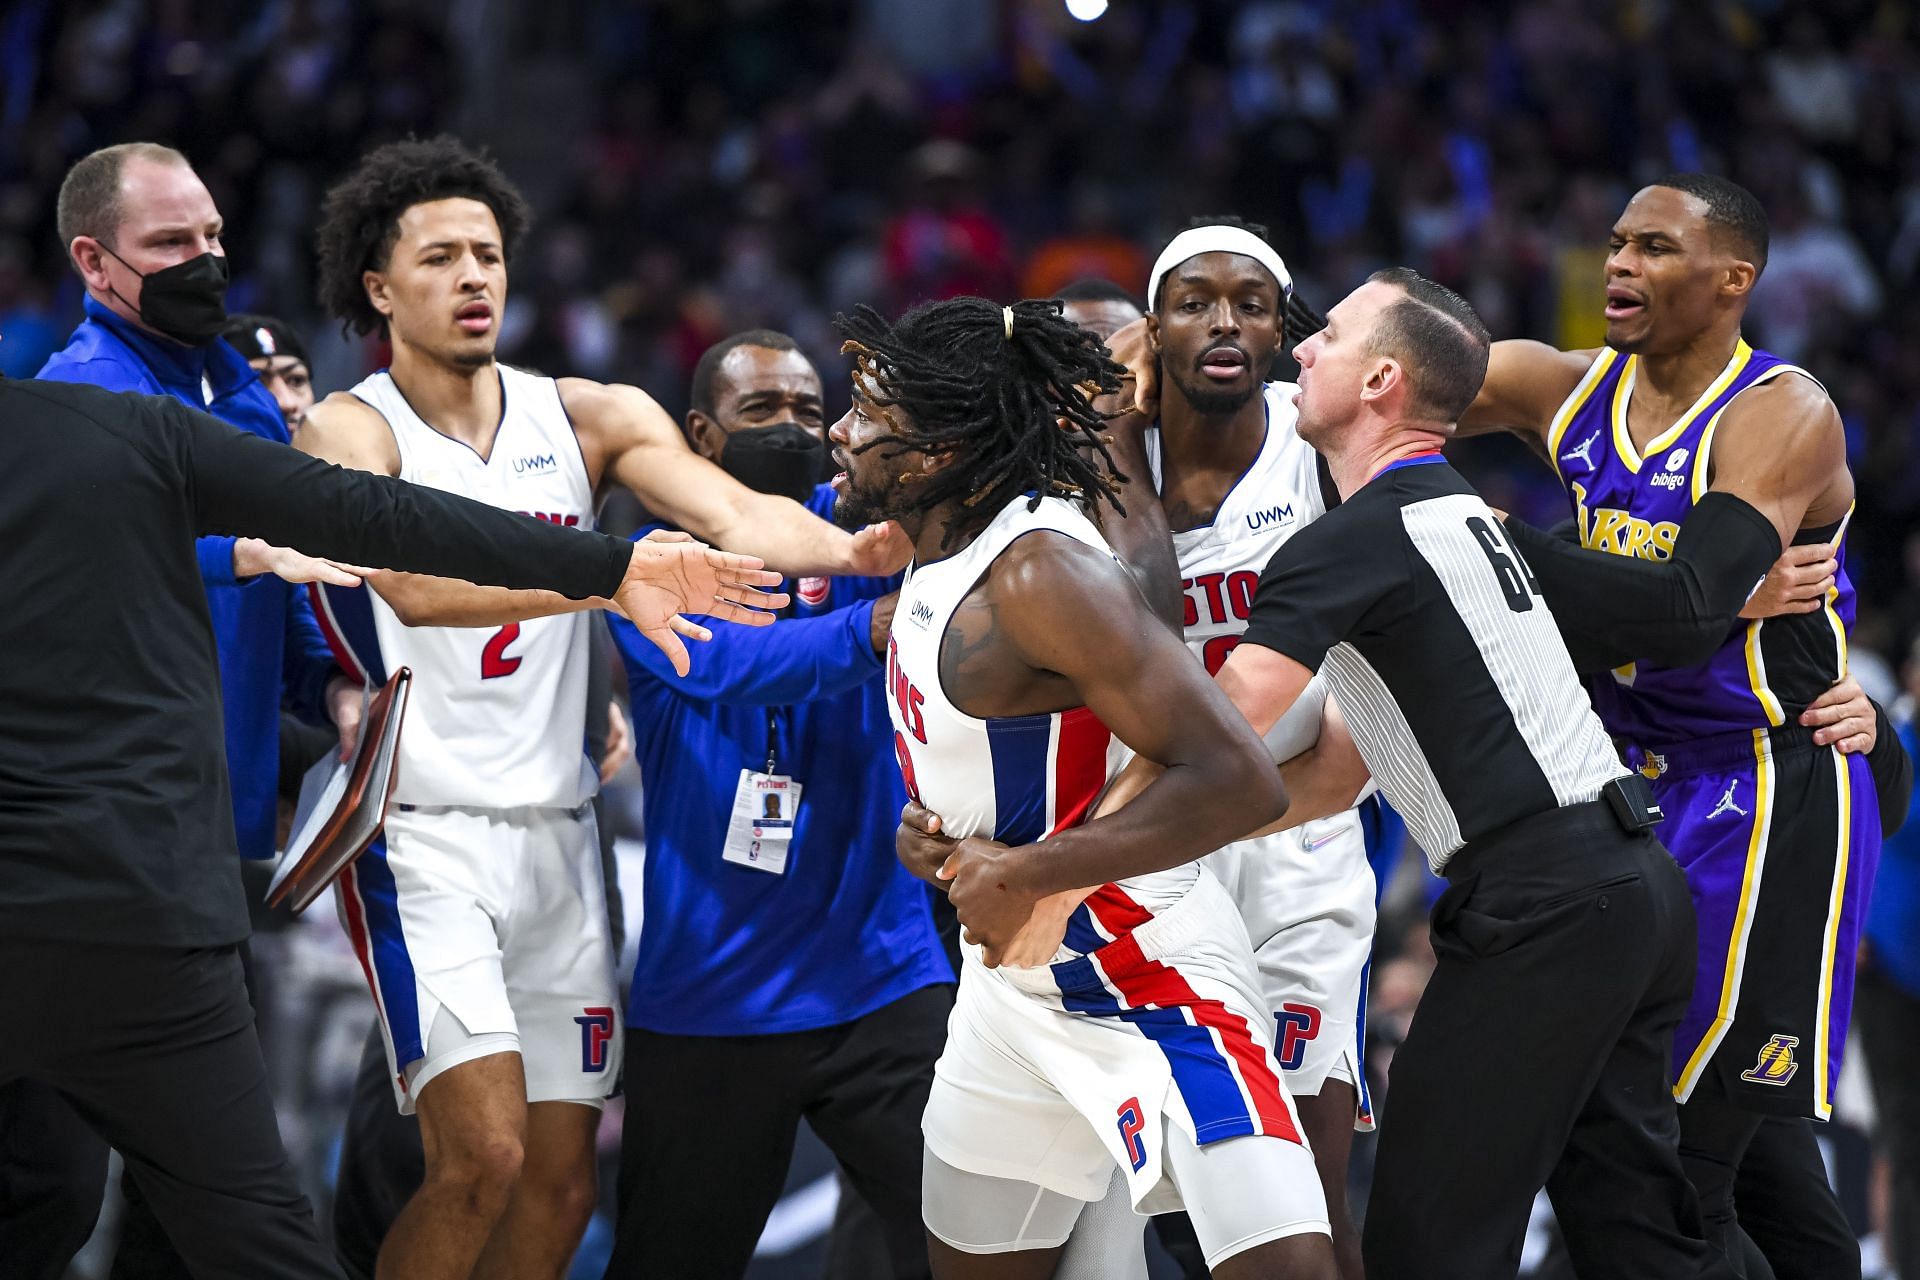 The referee and Detroit Pistons players trying to calm down a heated Isaiah Stewart